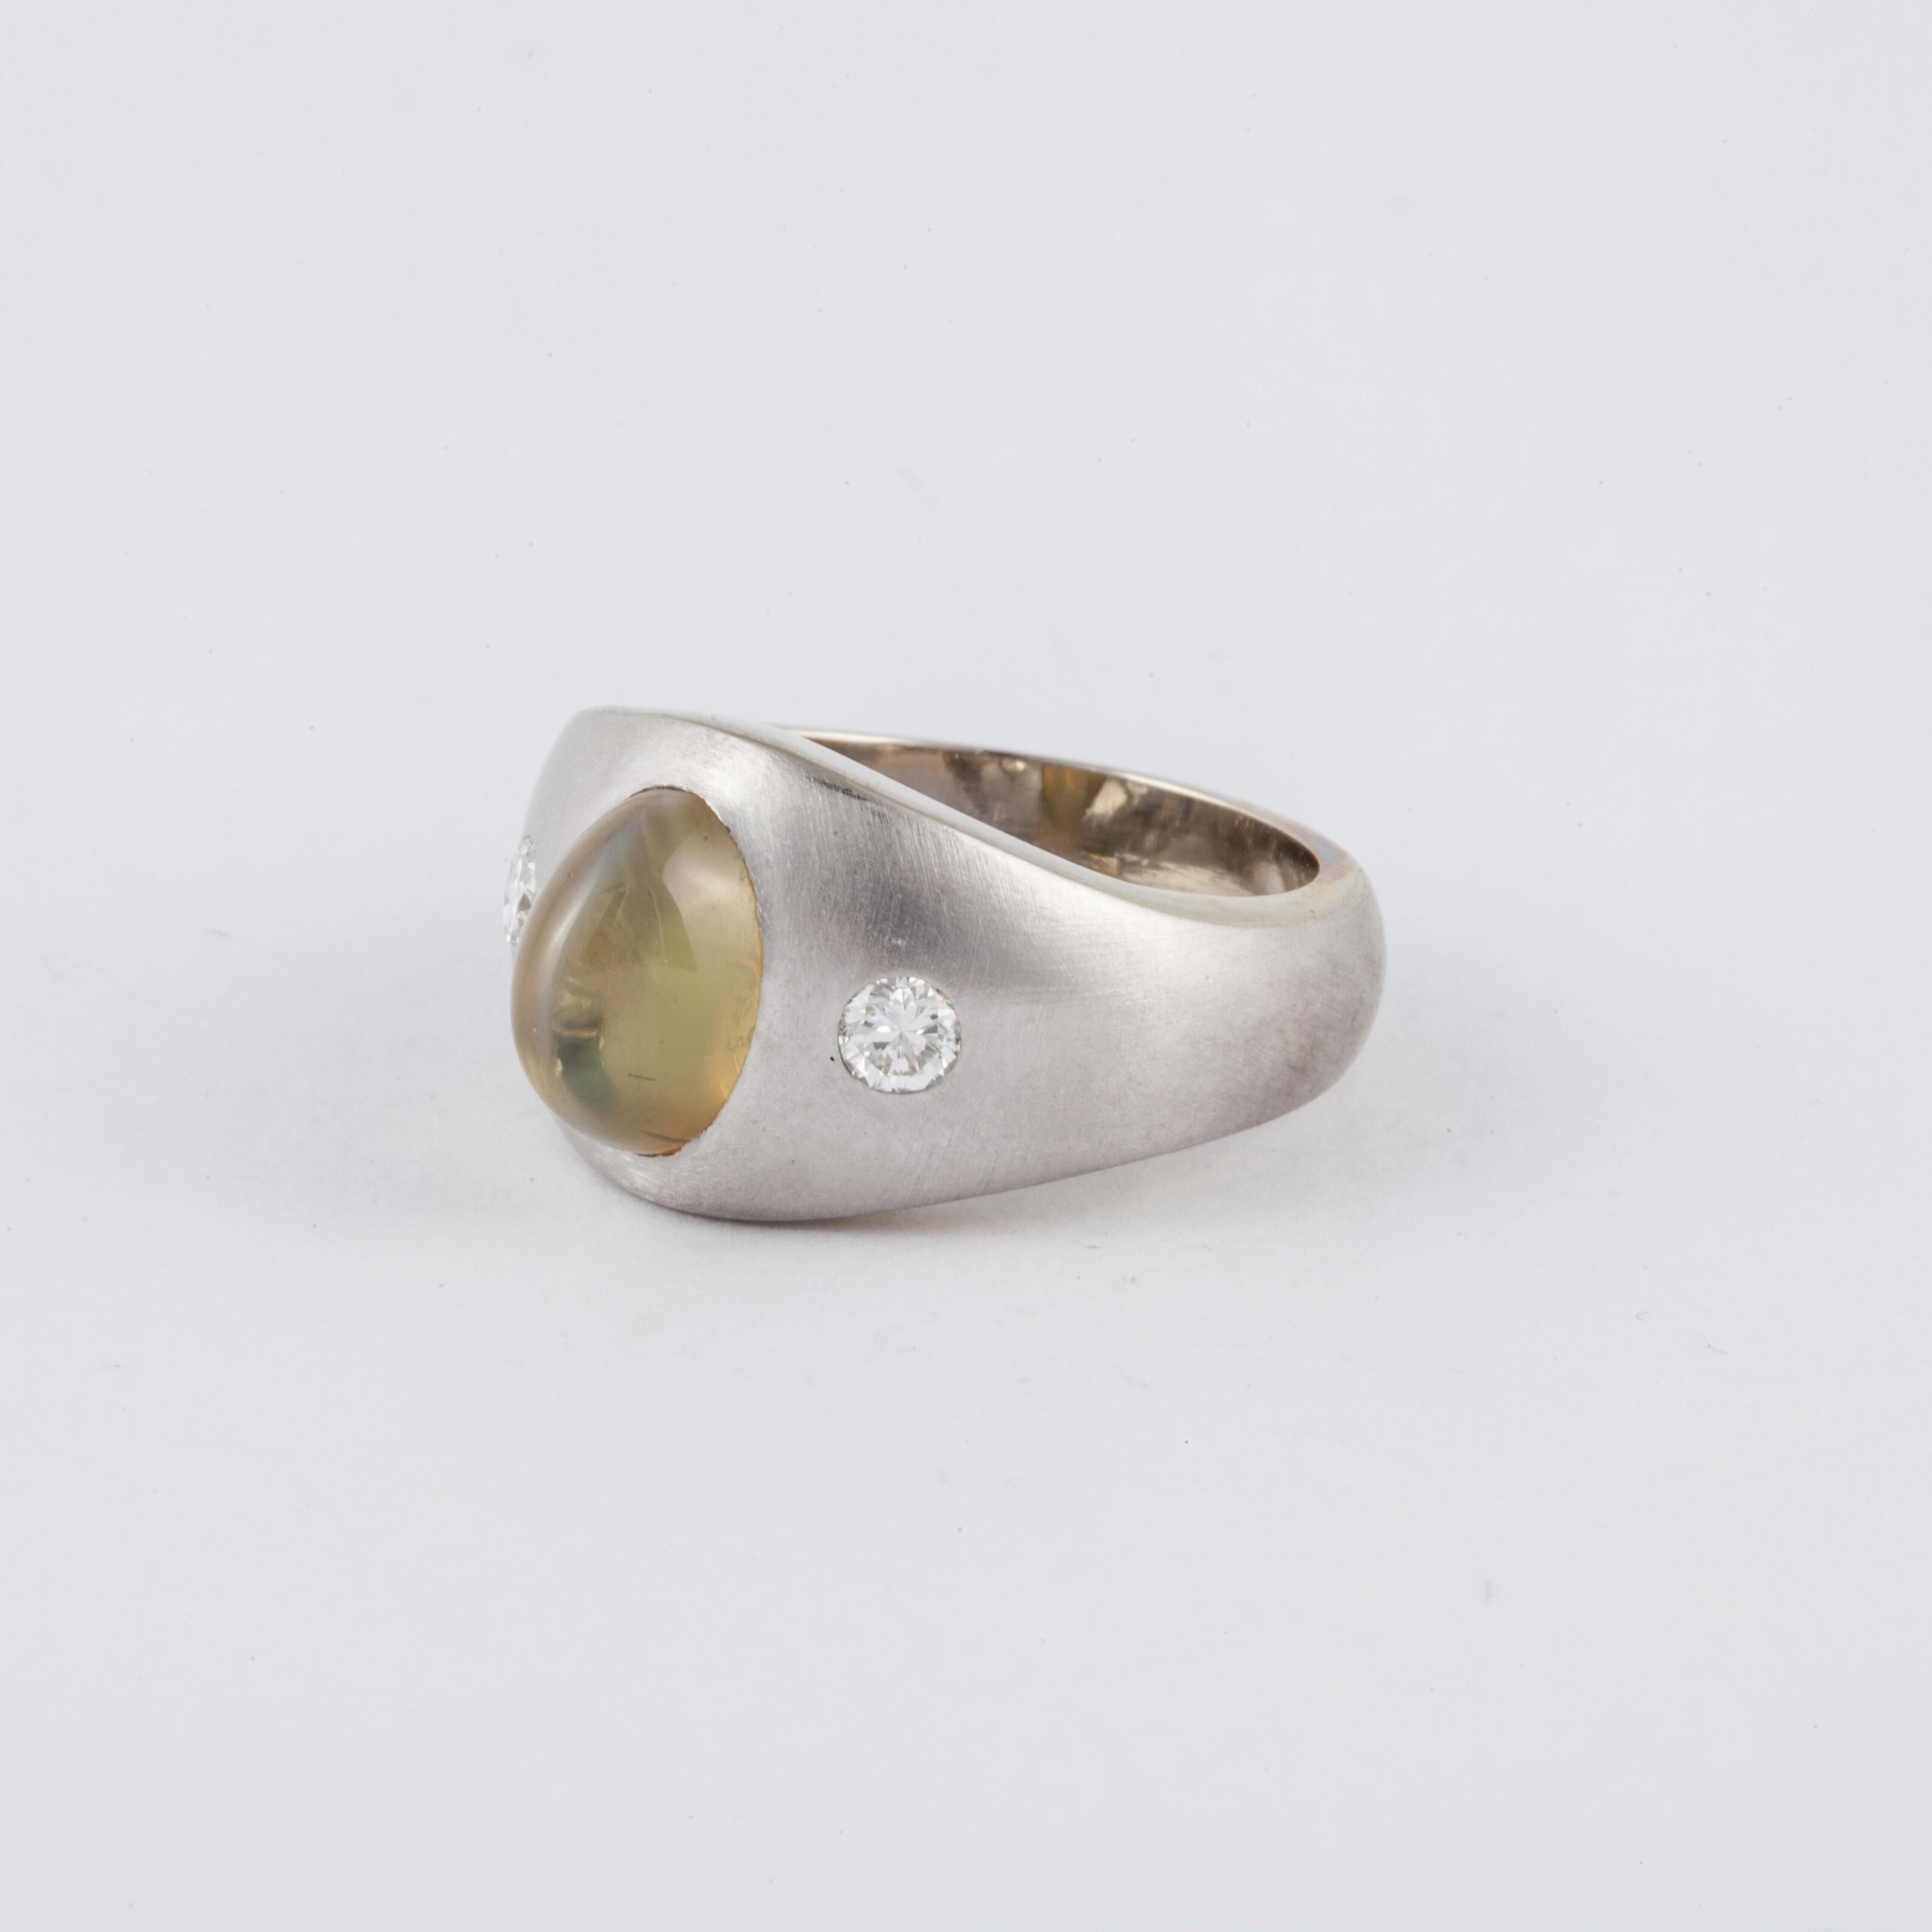 14K white brushed gold ring featuring a 4.70 carat cat's eye chrysoberyl accented by diamonds. The diamonds total 0.28 carats.  Measures 3/4 inches by 1/2 inches and stands 7/16 inches off the finger.